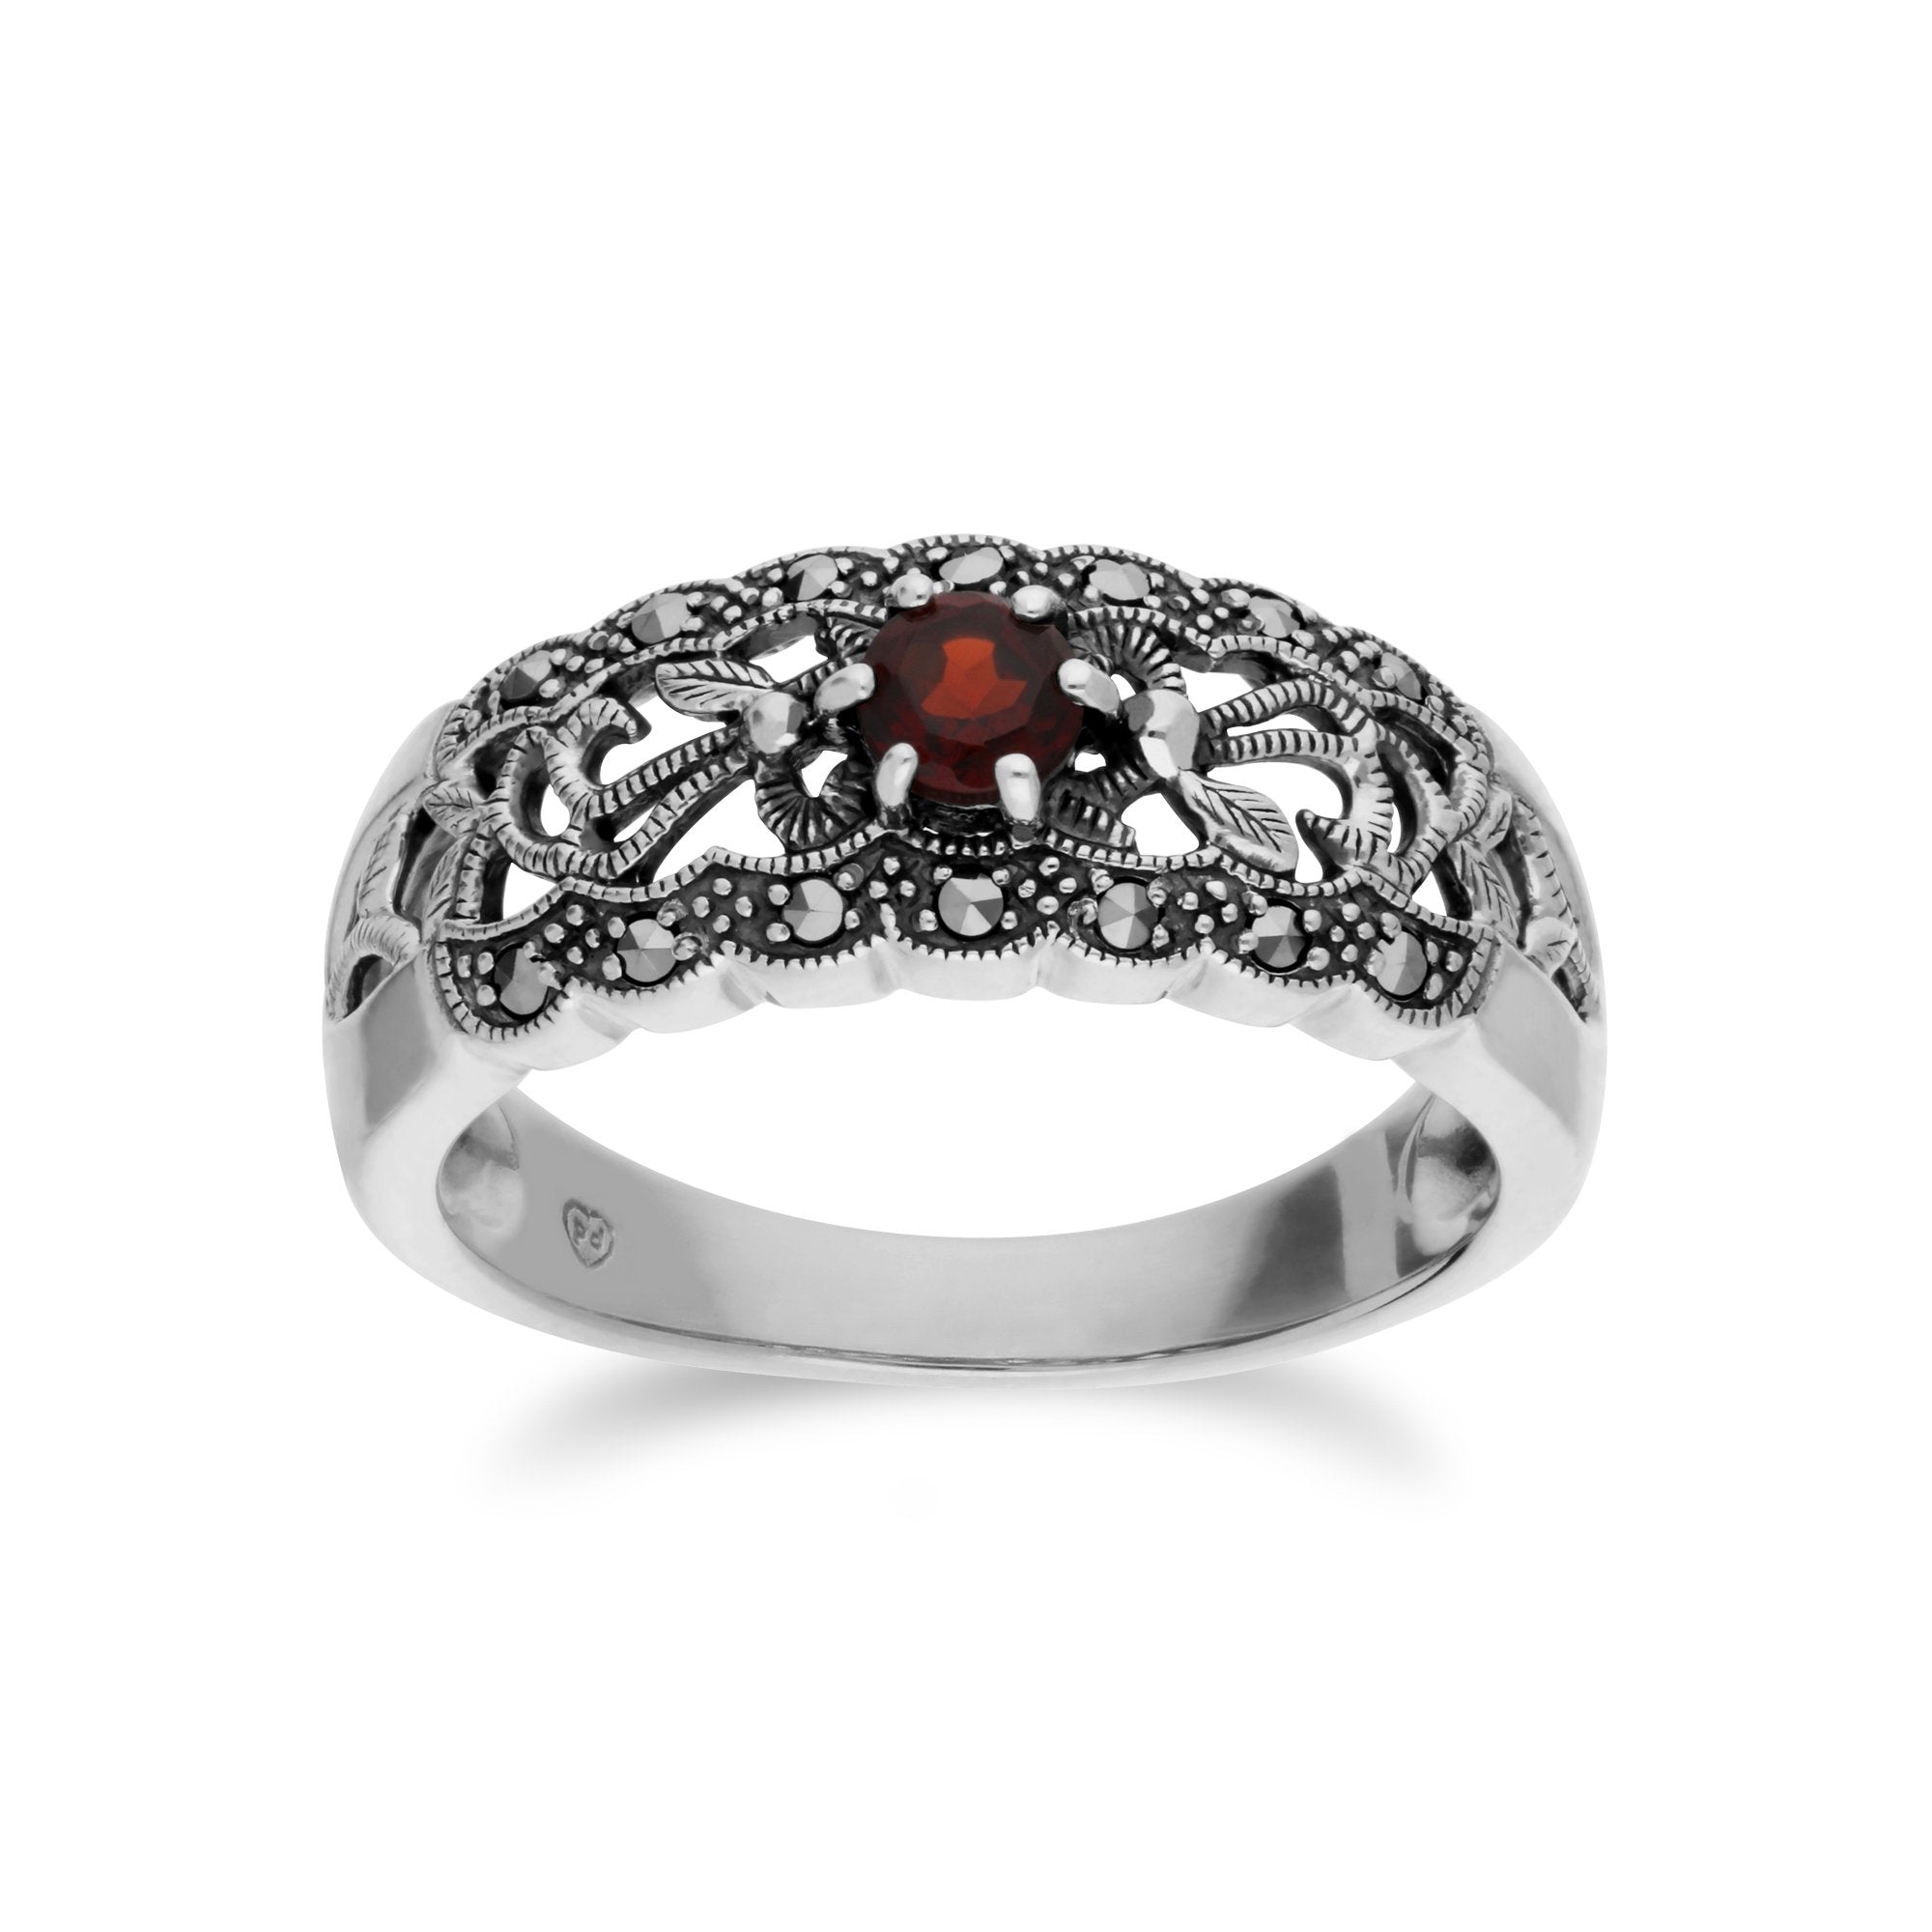 Art Nouveau Style Round Garnet & Marcasite Floral Band Ring in 925 Sterling Silver